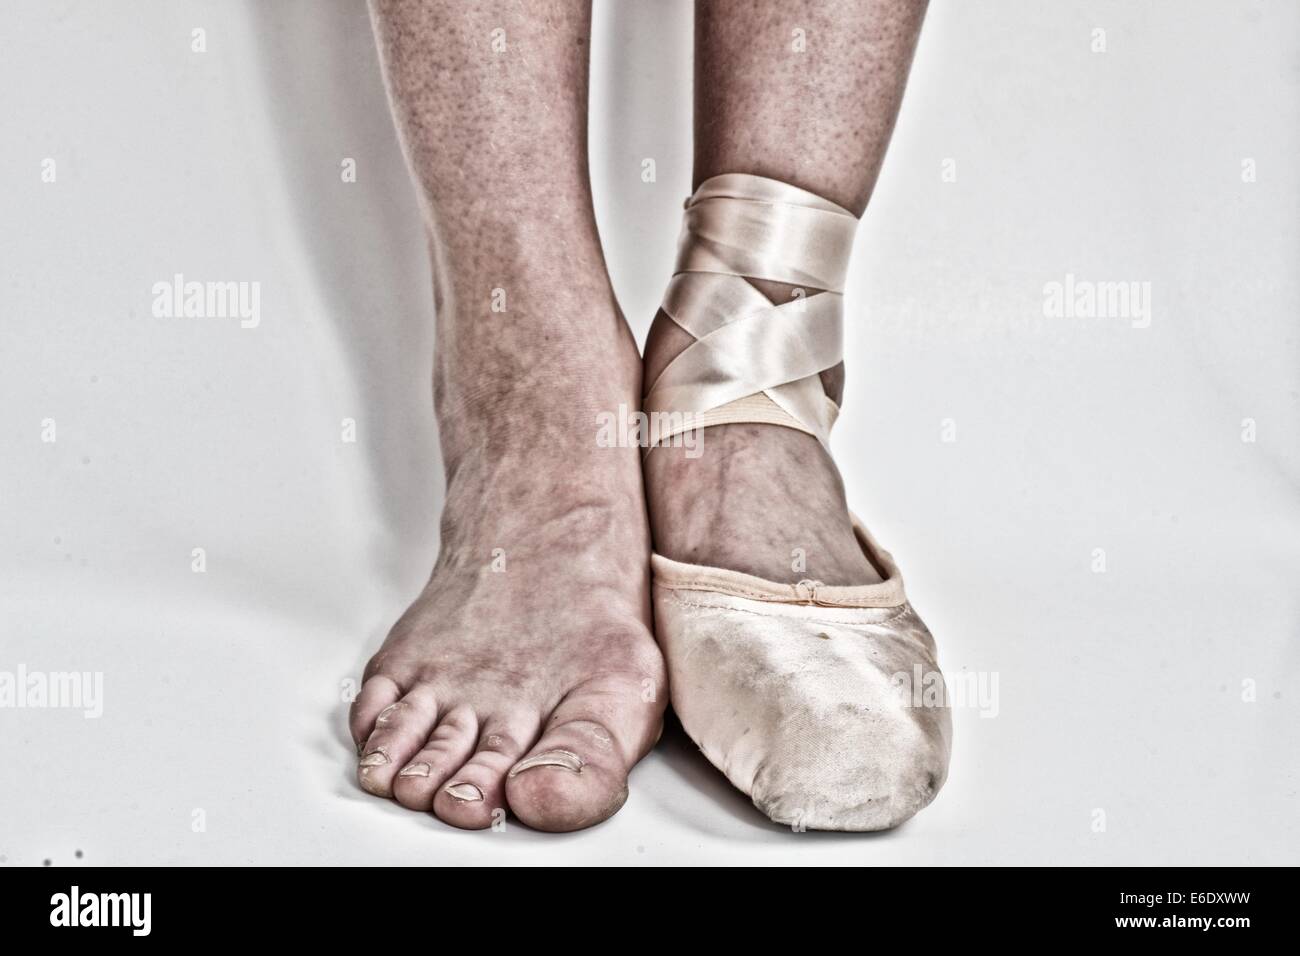 Feet of a ballerina, one with a ballet pointe shoe and the other barefoot. Stock Photo